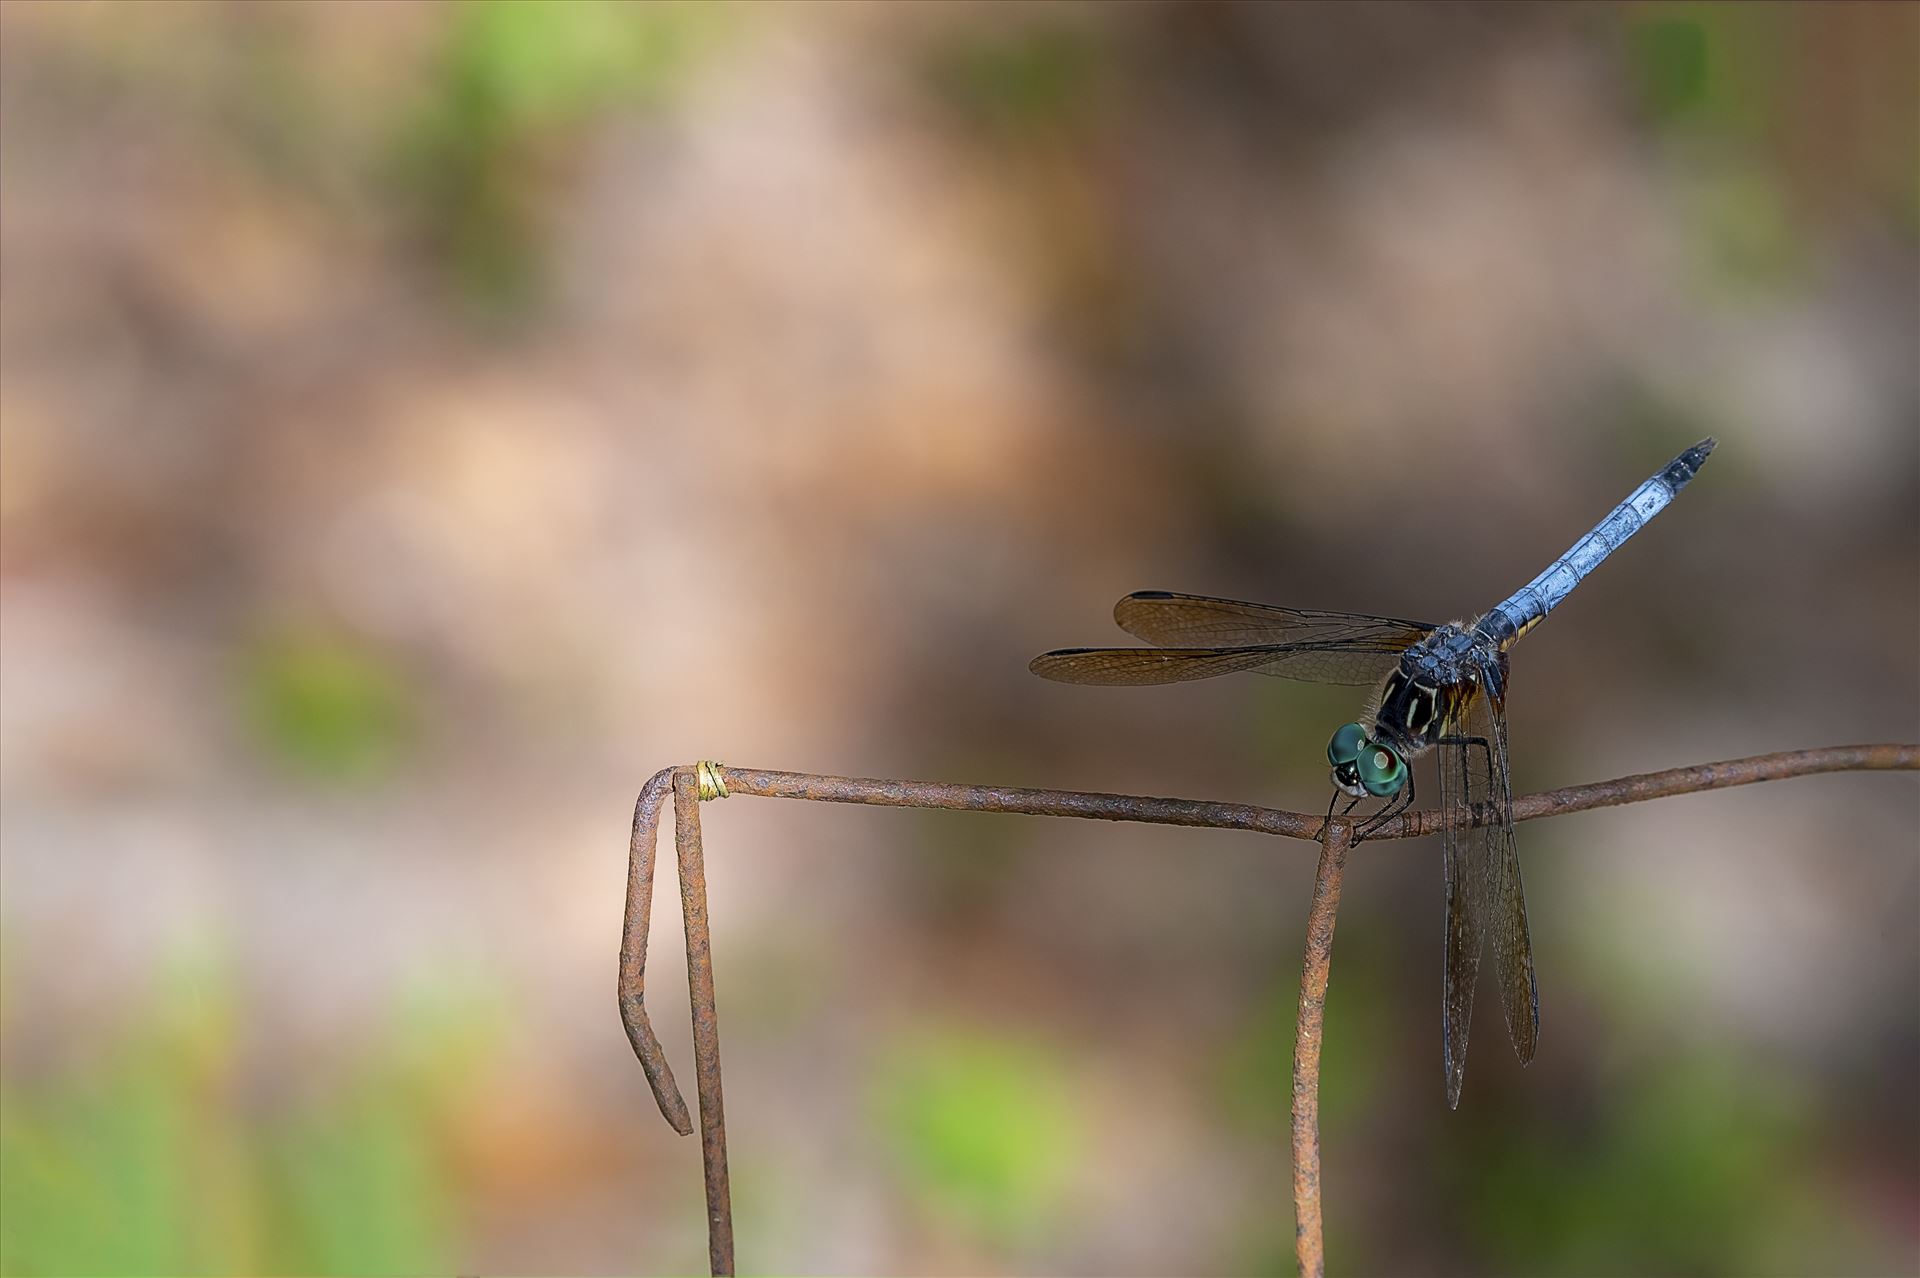 blue green dragonfly on rusted wire fence ss as 8500196.jpg - close up macro photography of green and blue dragonfly that landed on an old rusty wire fence by Terry Kelly Photography